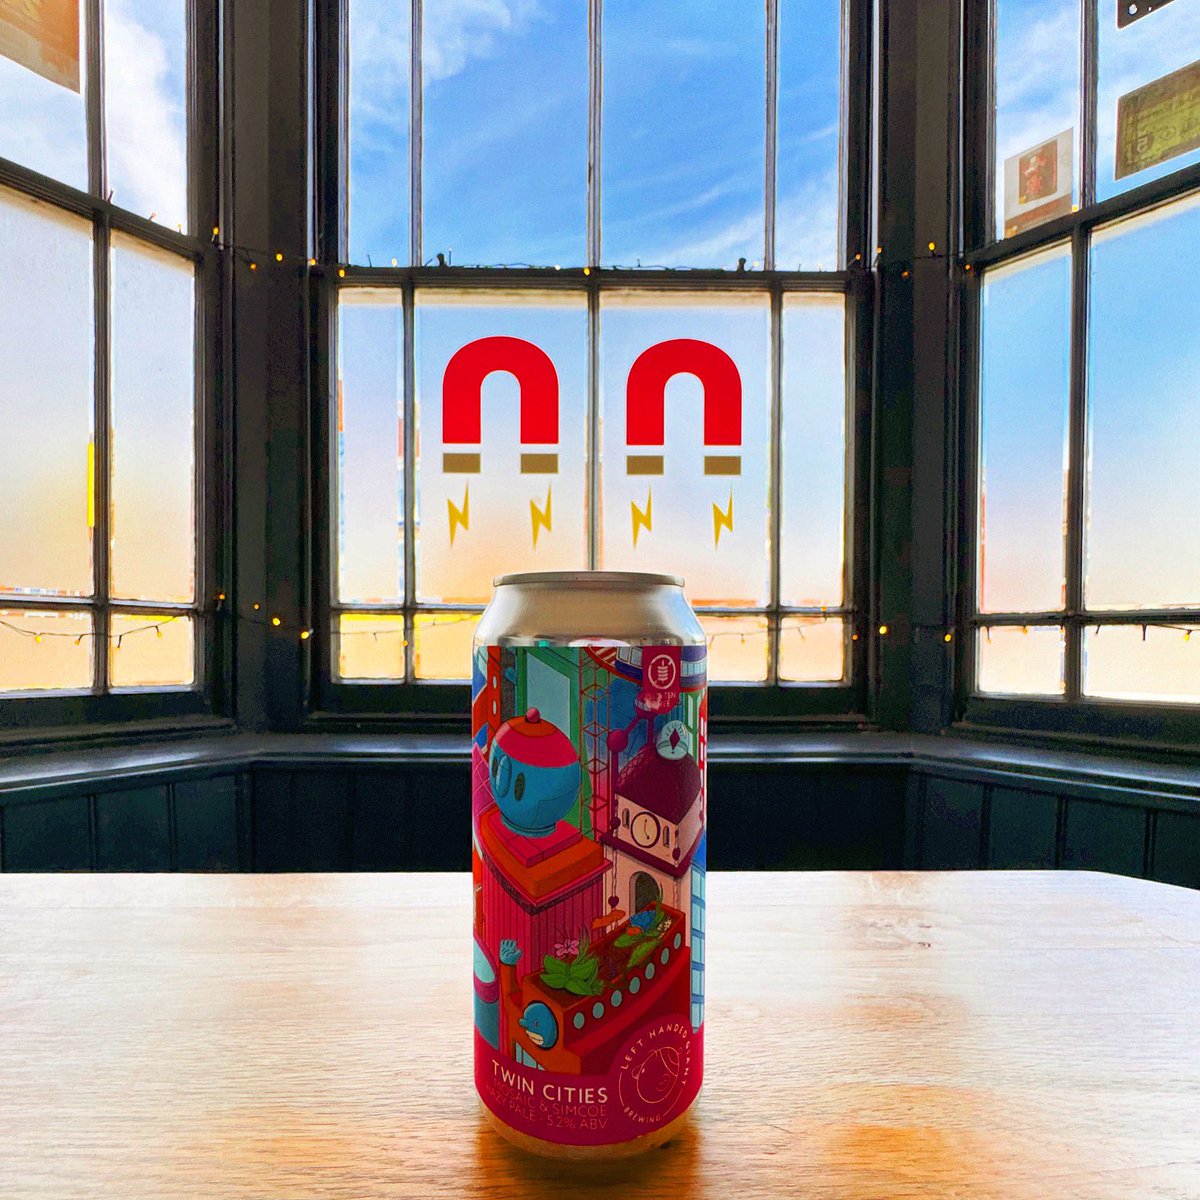 NEW in at The Magnet 🧲 

@LHGBrewingco 
• Twin Cities (5.2%) 🏙️ 

This beer is #vegan and #glutenfree 🌱

#magnetcolchester
#colchesterbusiness 
#colchesterpub
#colchester
#essexpub
#lefthandedgiantbrewingco 
#micropub